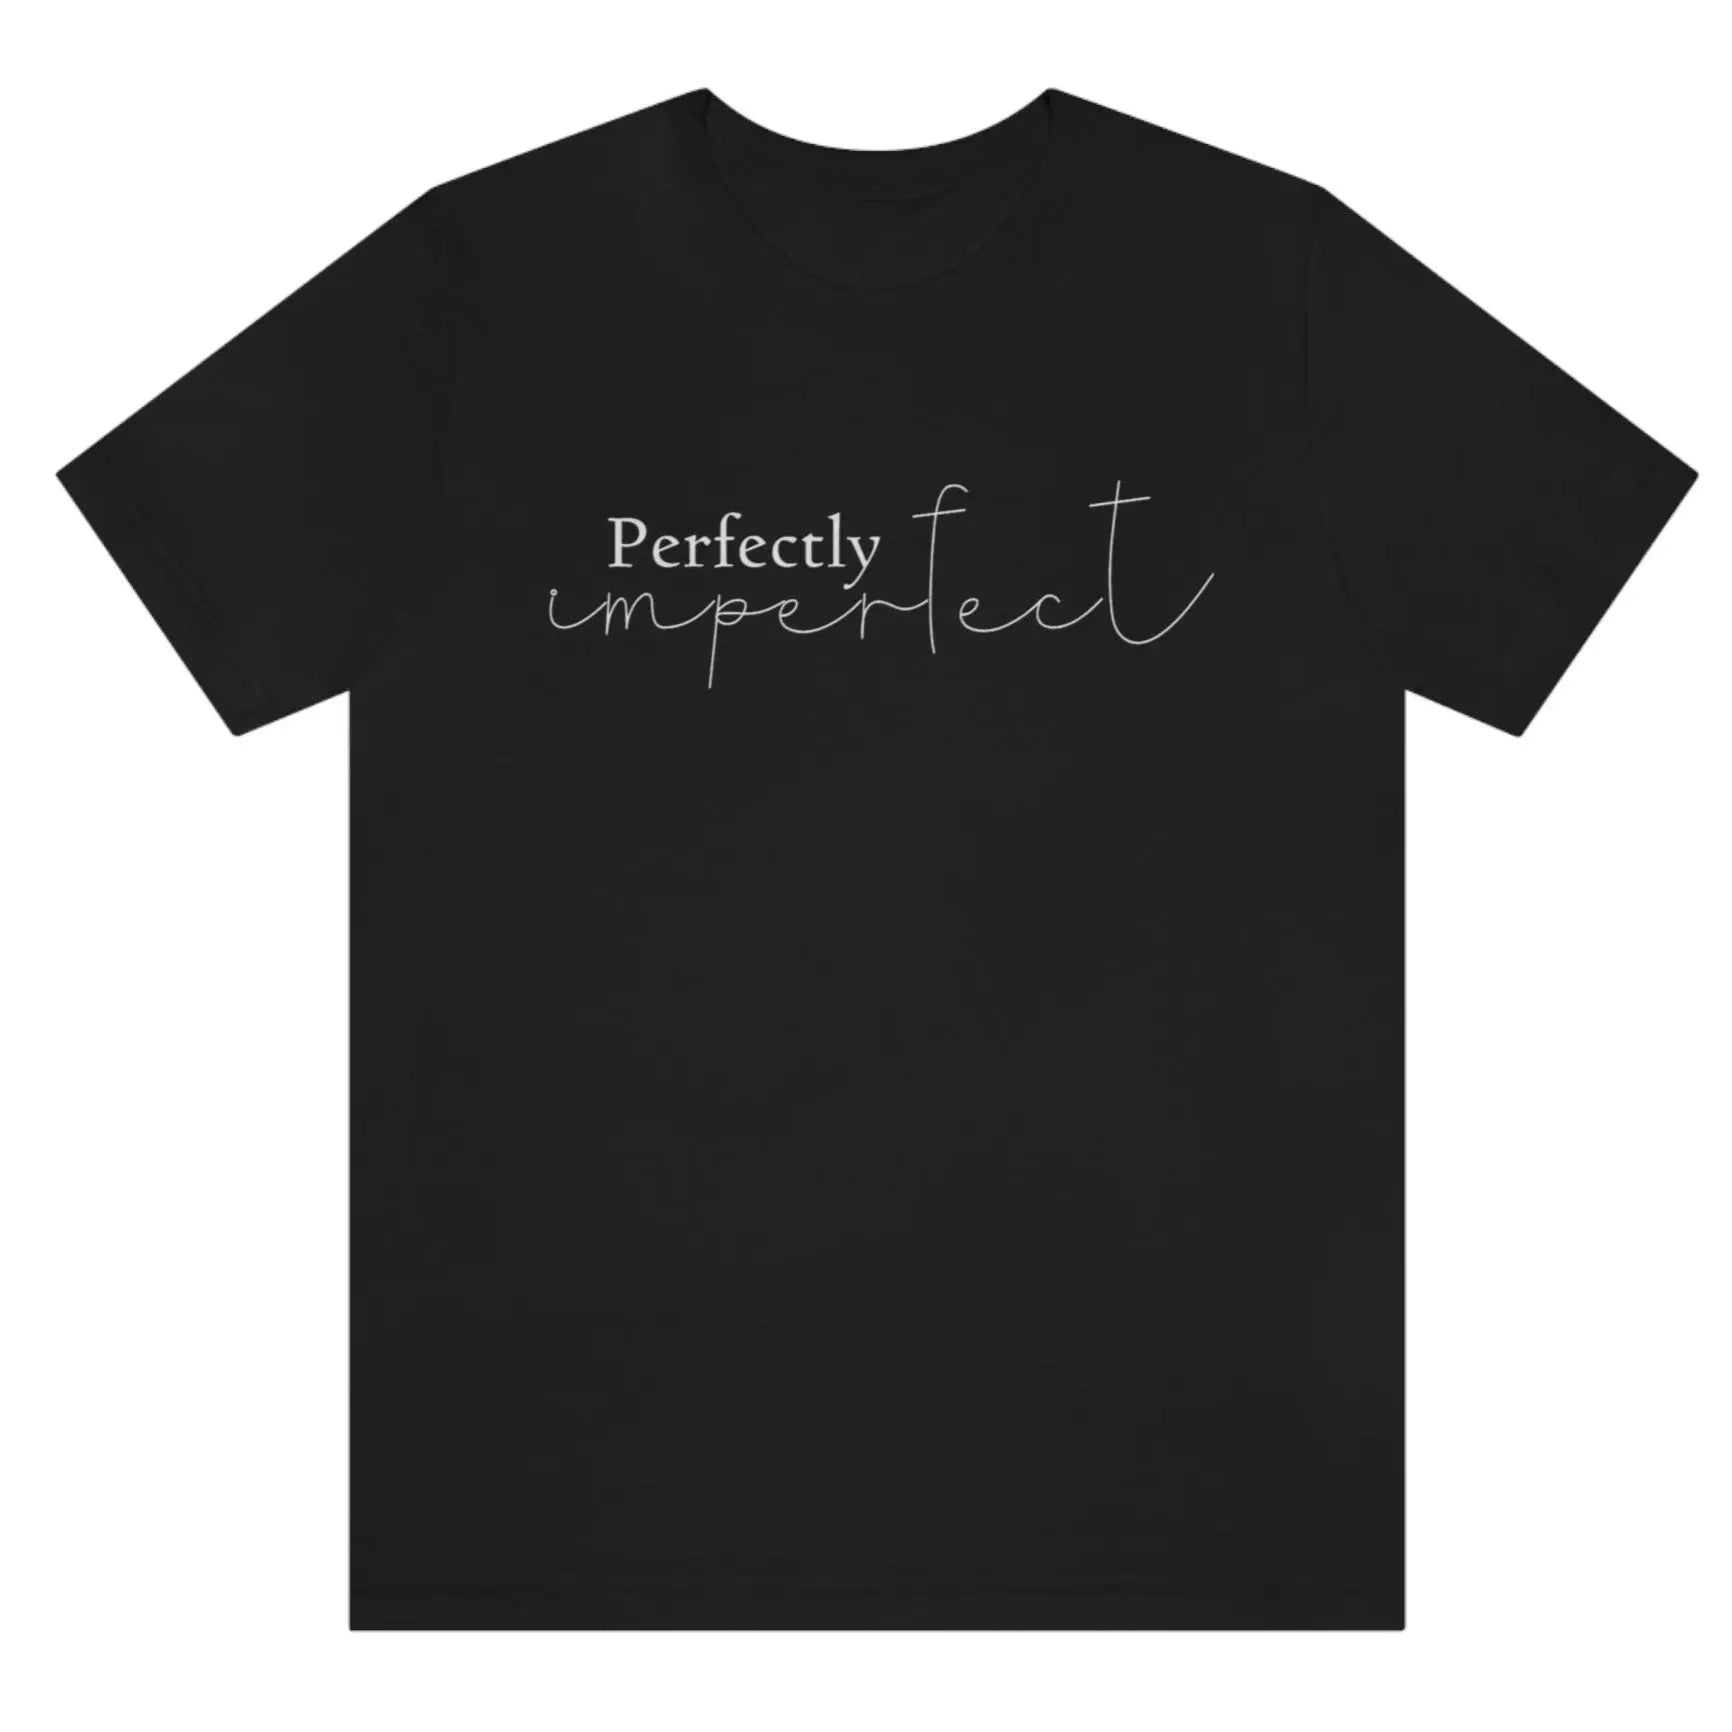 perfectly-imperfect-black-t-shirt-womens